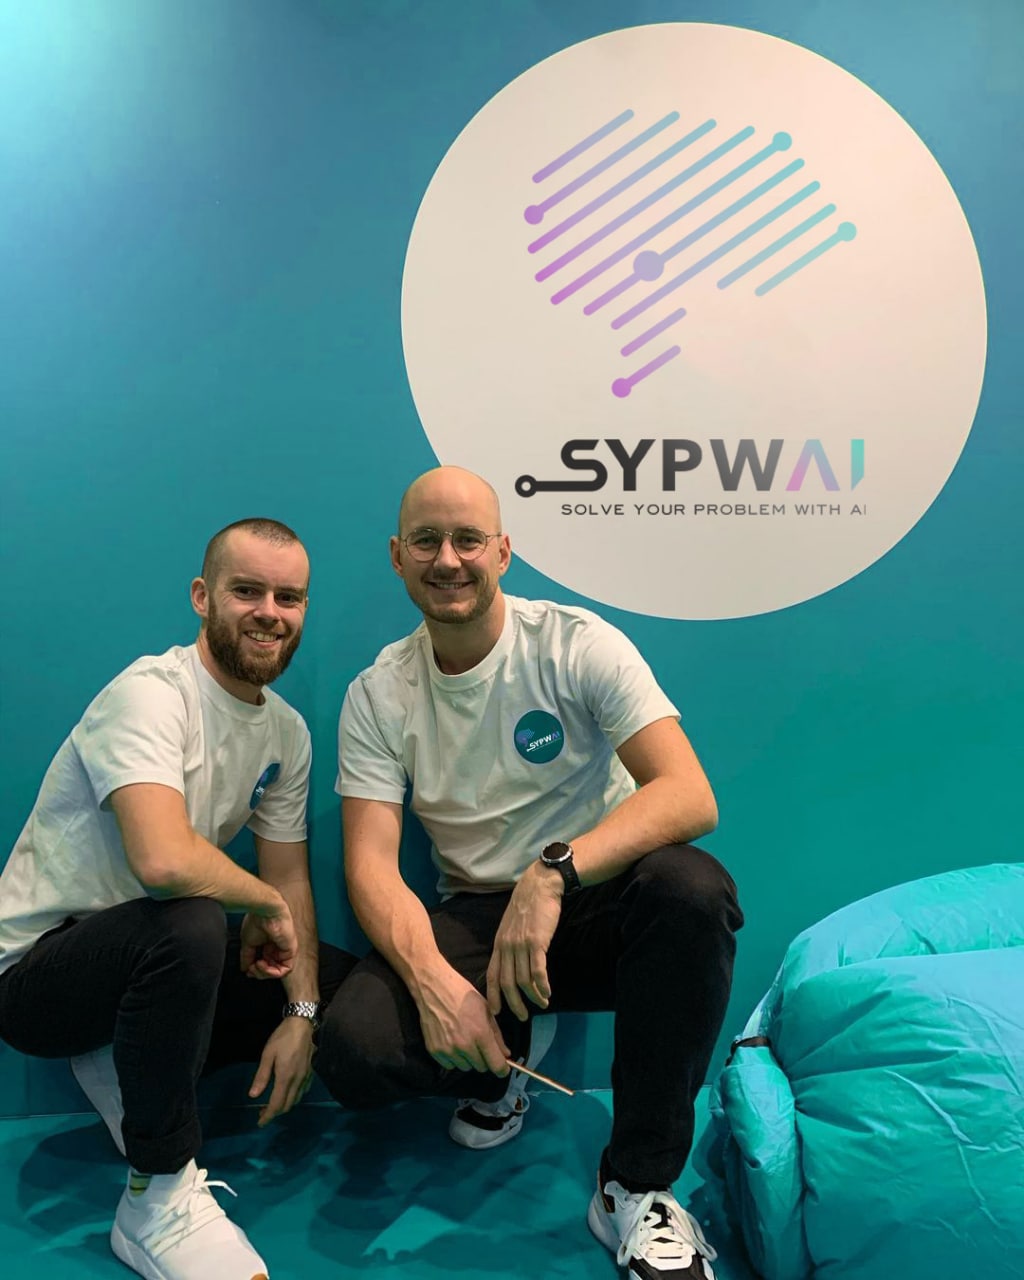 Sypwai Company: Follow Your Professional Dreams and Learn More About AI